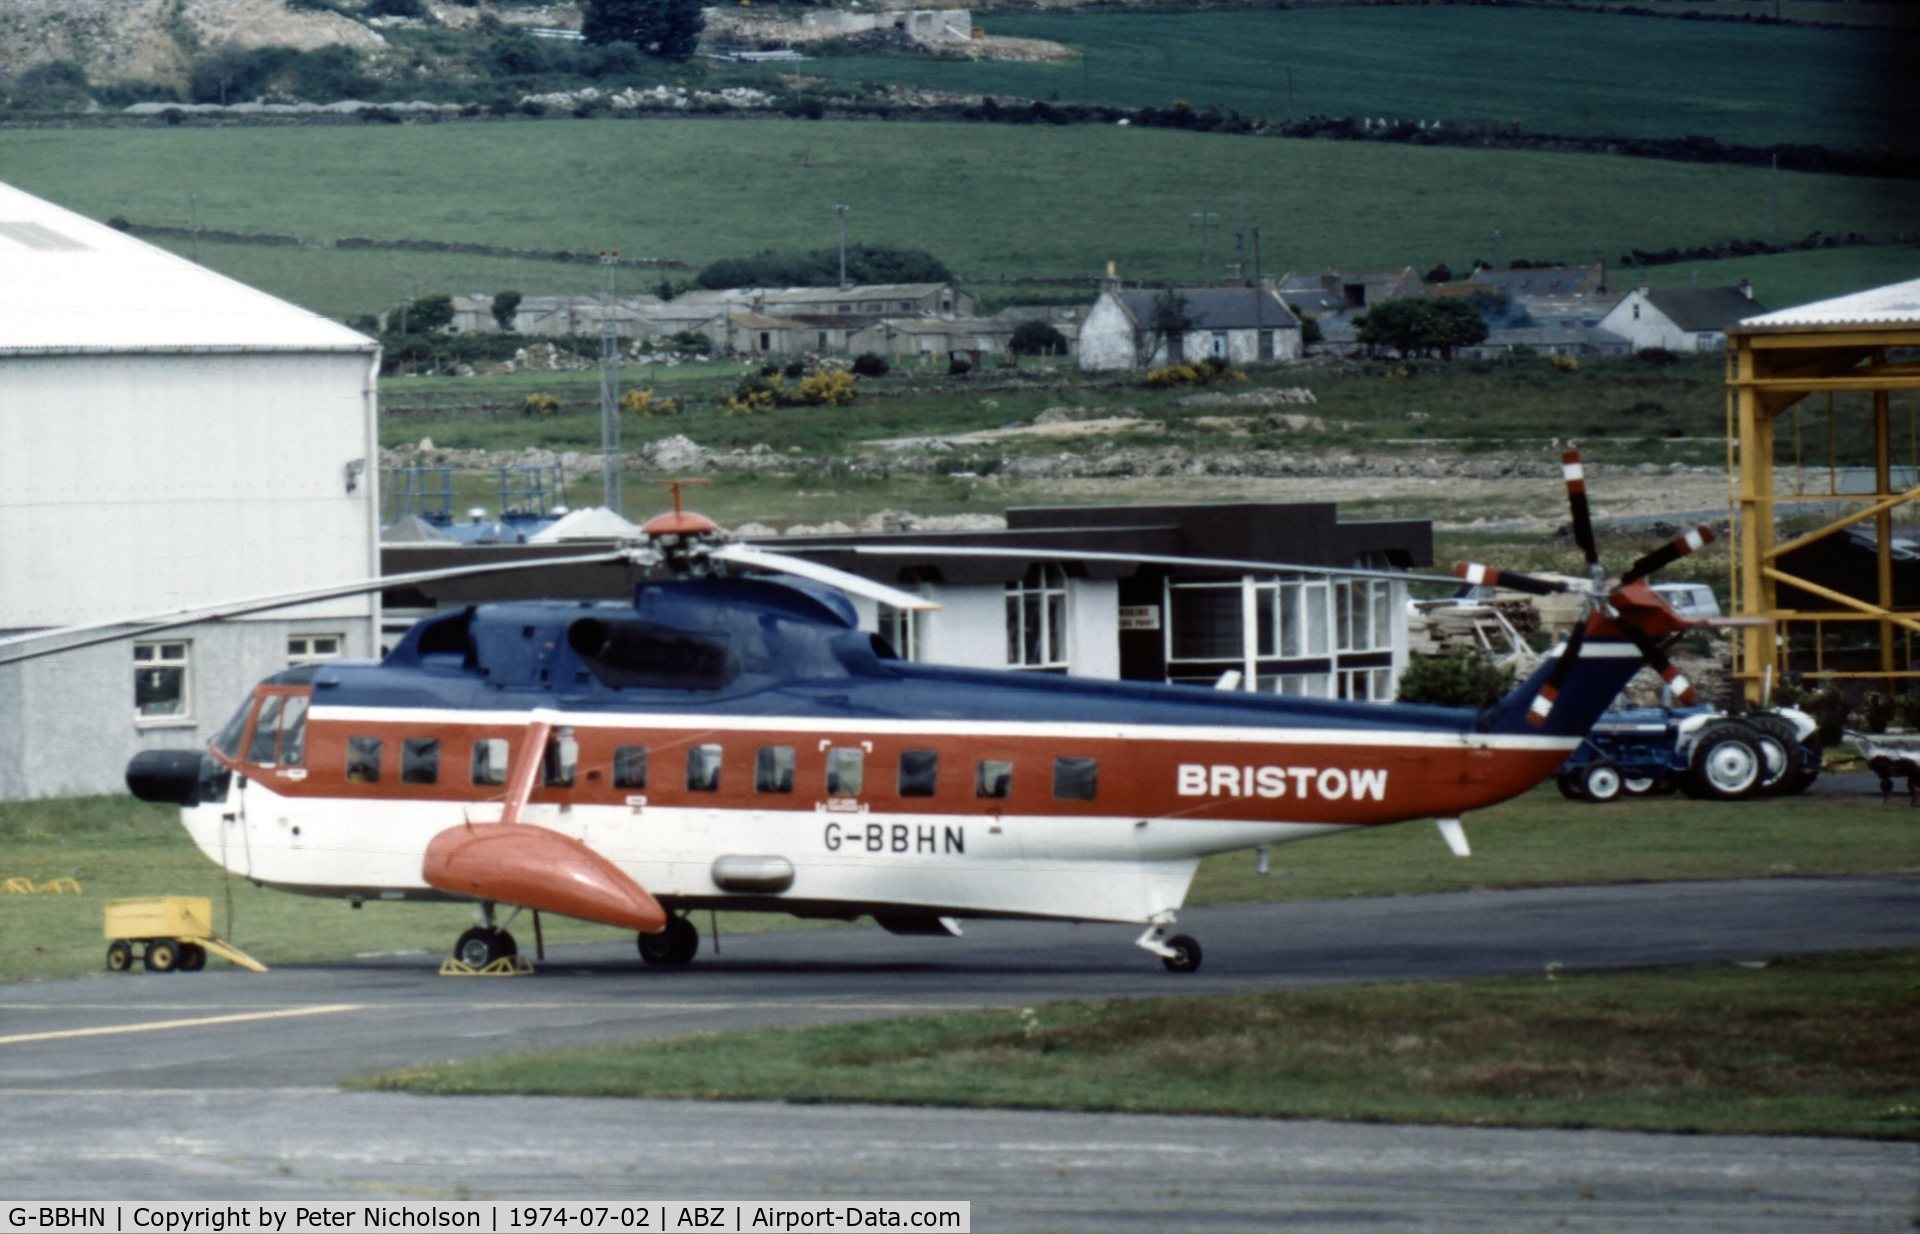 G-BBHN, 1973 Sikorsky S-61N C/N 61714, S-61N of Bristow Helicopters Limited at Aberdeen in the Summer of 1974.